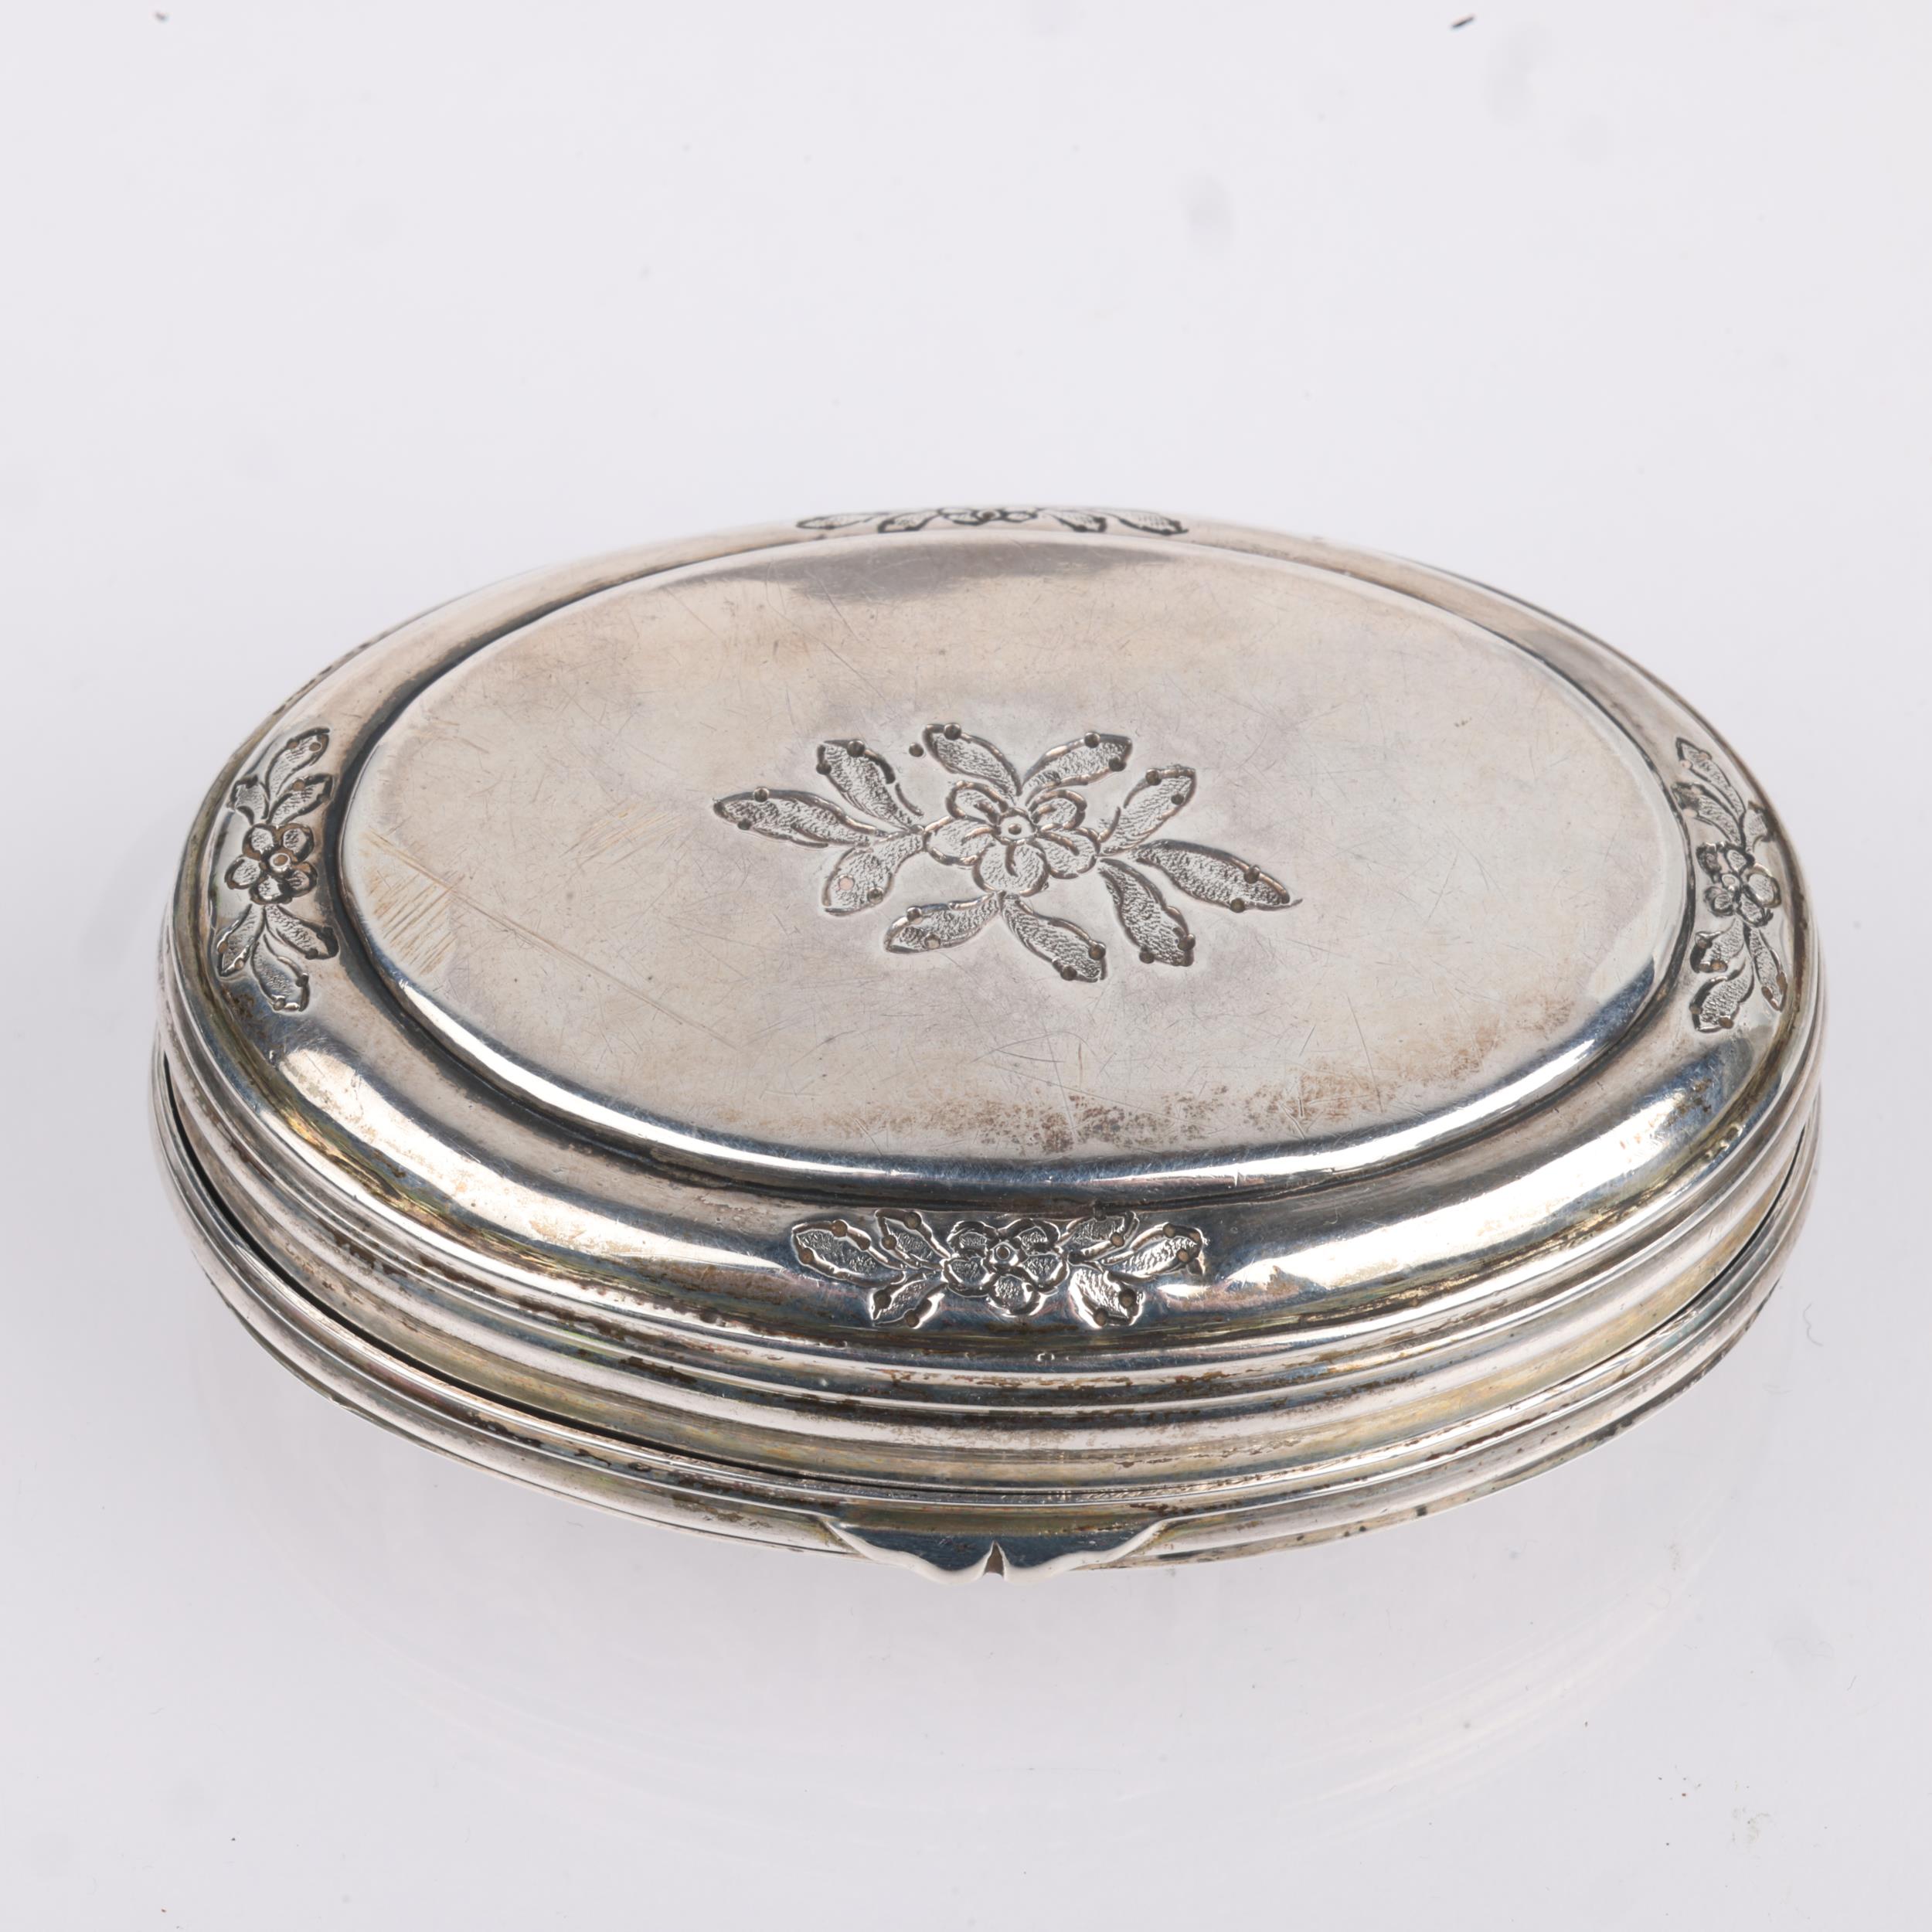 An 18th century Continental silver snuffbox, oval form with relief embossed weapon armaments - Image 2 of 3